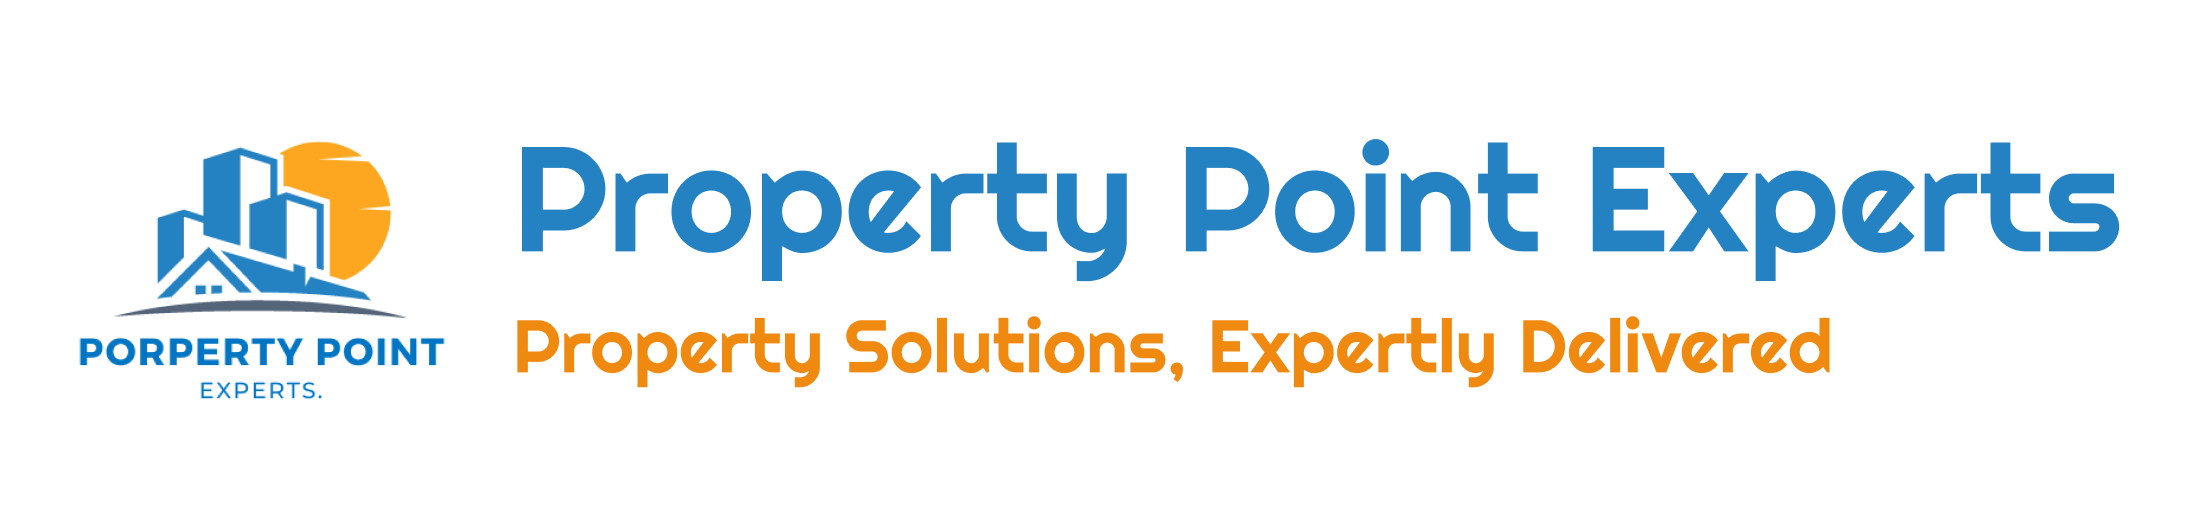 Property Point Experts